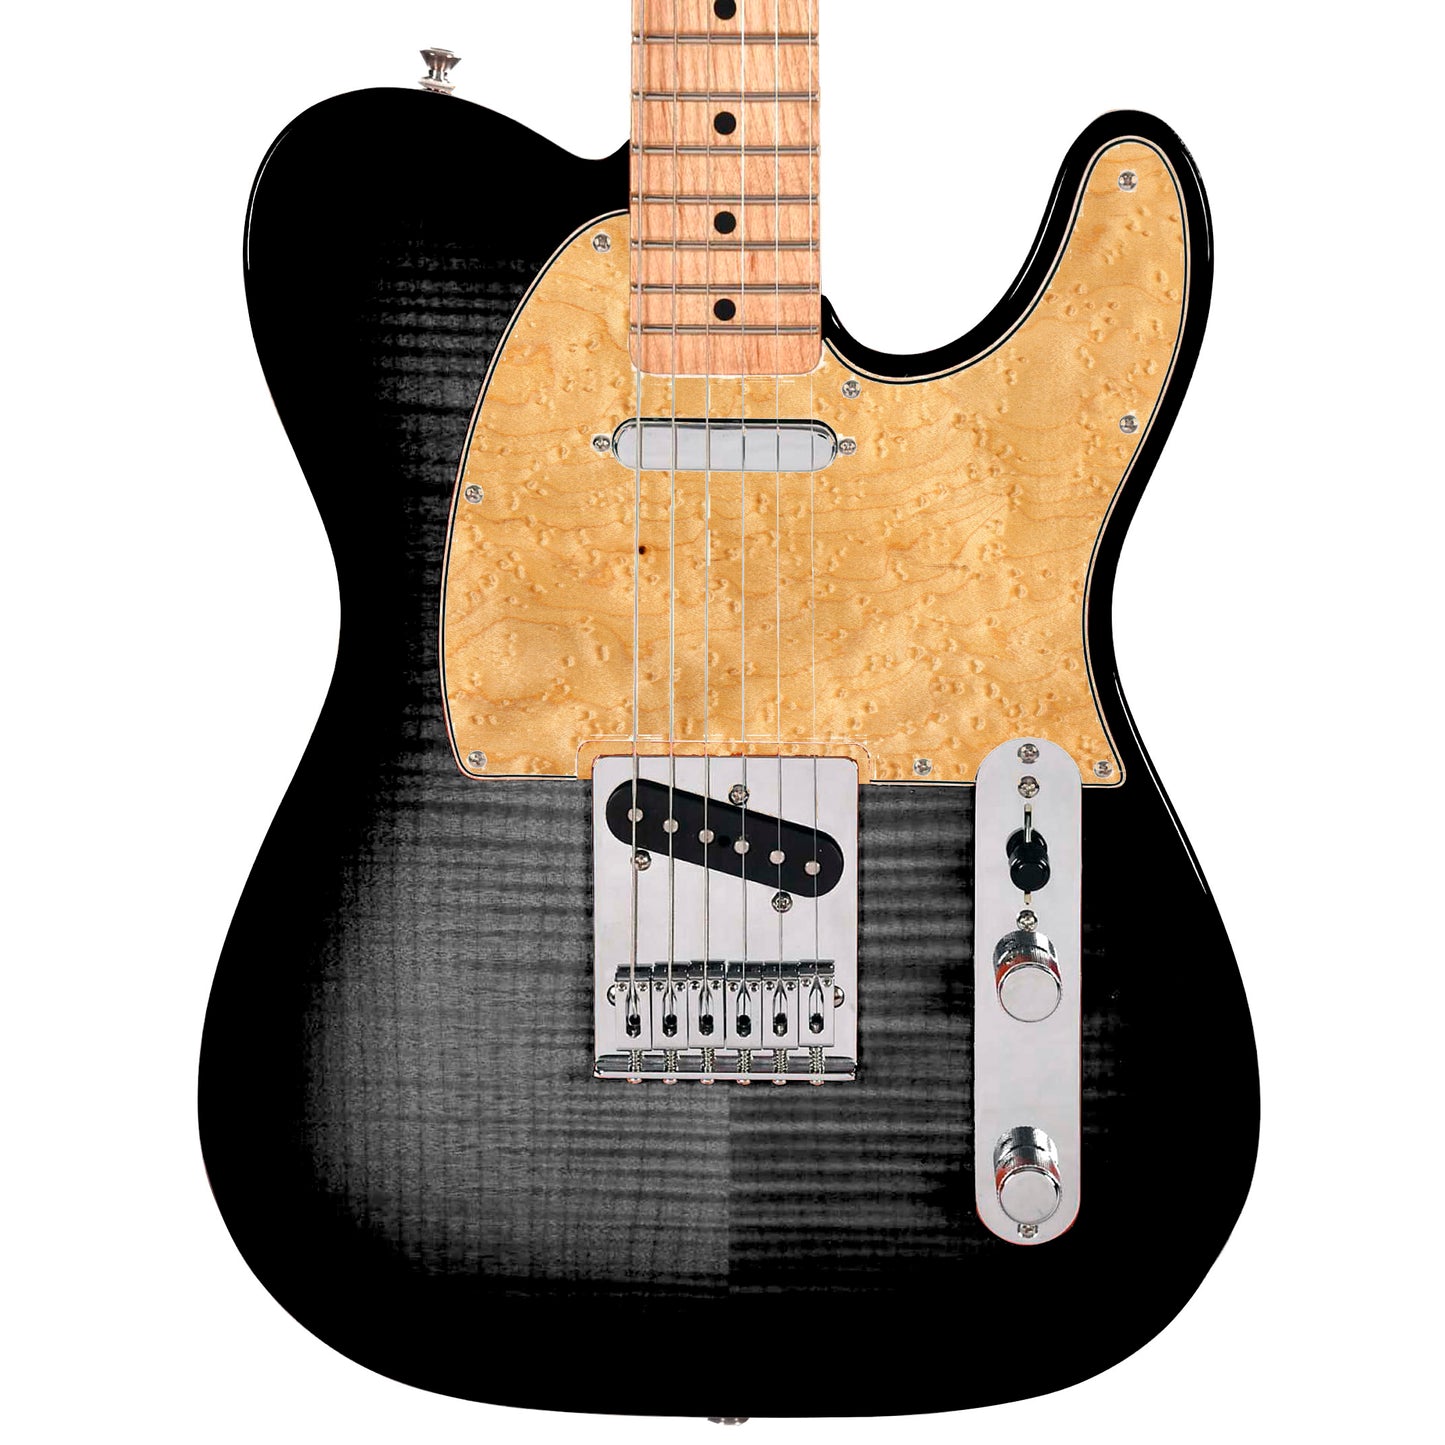 Guitar Custom PickGuard Sticker Skins. Customise your own existing Pickguard, Headstock, Tremolo Cover plate. The Wood Grain PK18